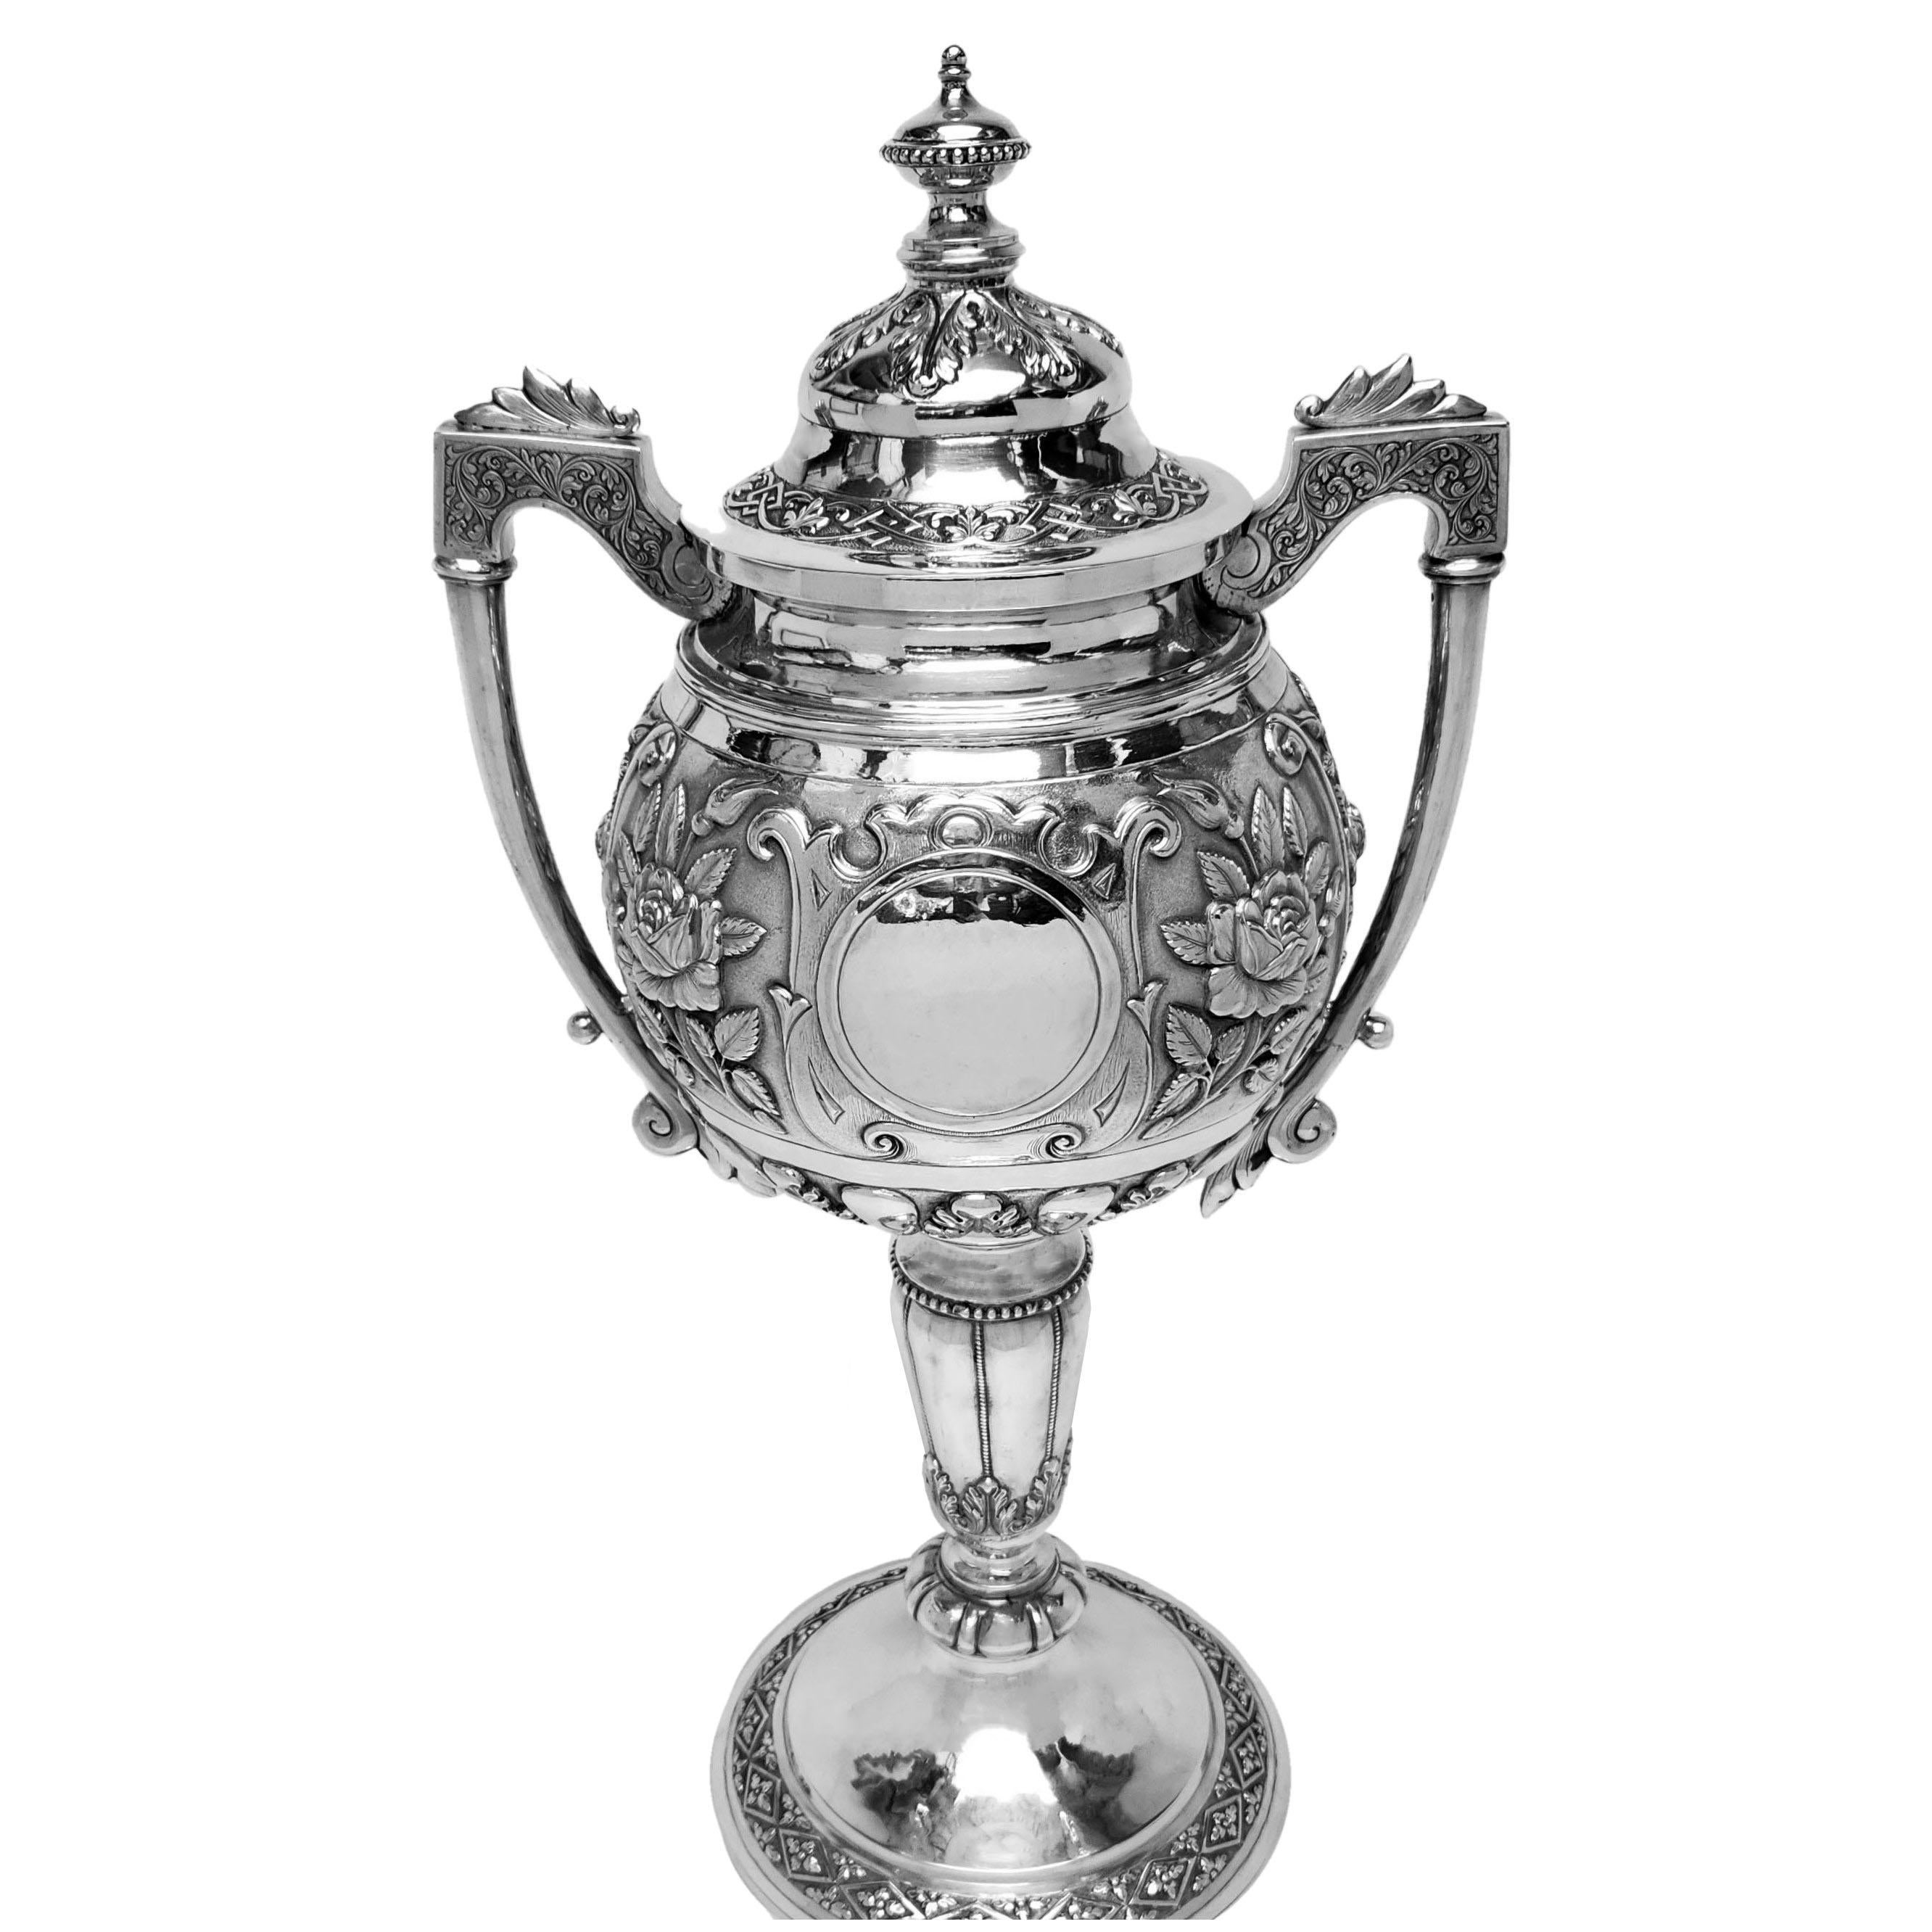 A magnificent Antique Indian Two Handled Cup & Cover with an unusual spherical form on top of  tall column. The body of the Cup is embellished with beautiful chased floral patterns surrounding a pair of round cartouches. The Lid, Foot and Column are